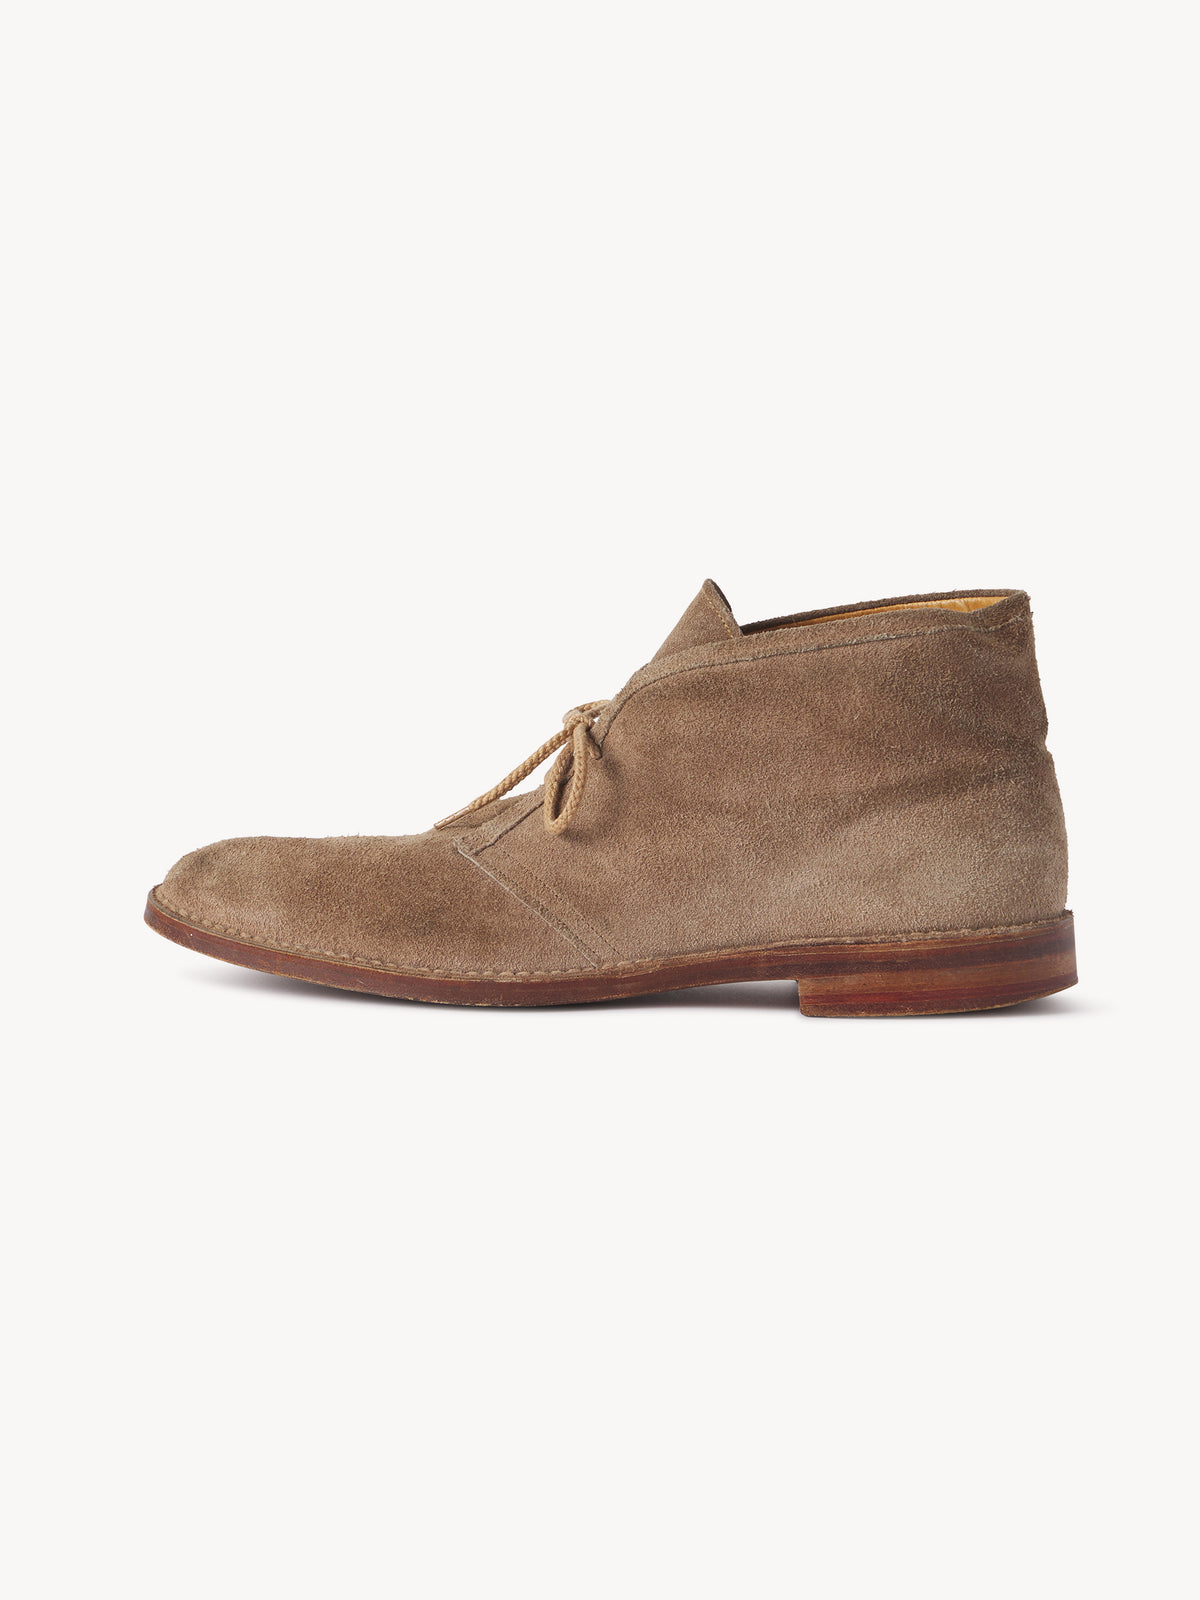 Made in England Clarks Leather Sole Desert Boot - 0157